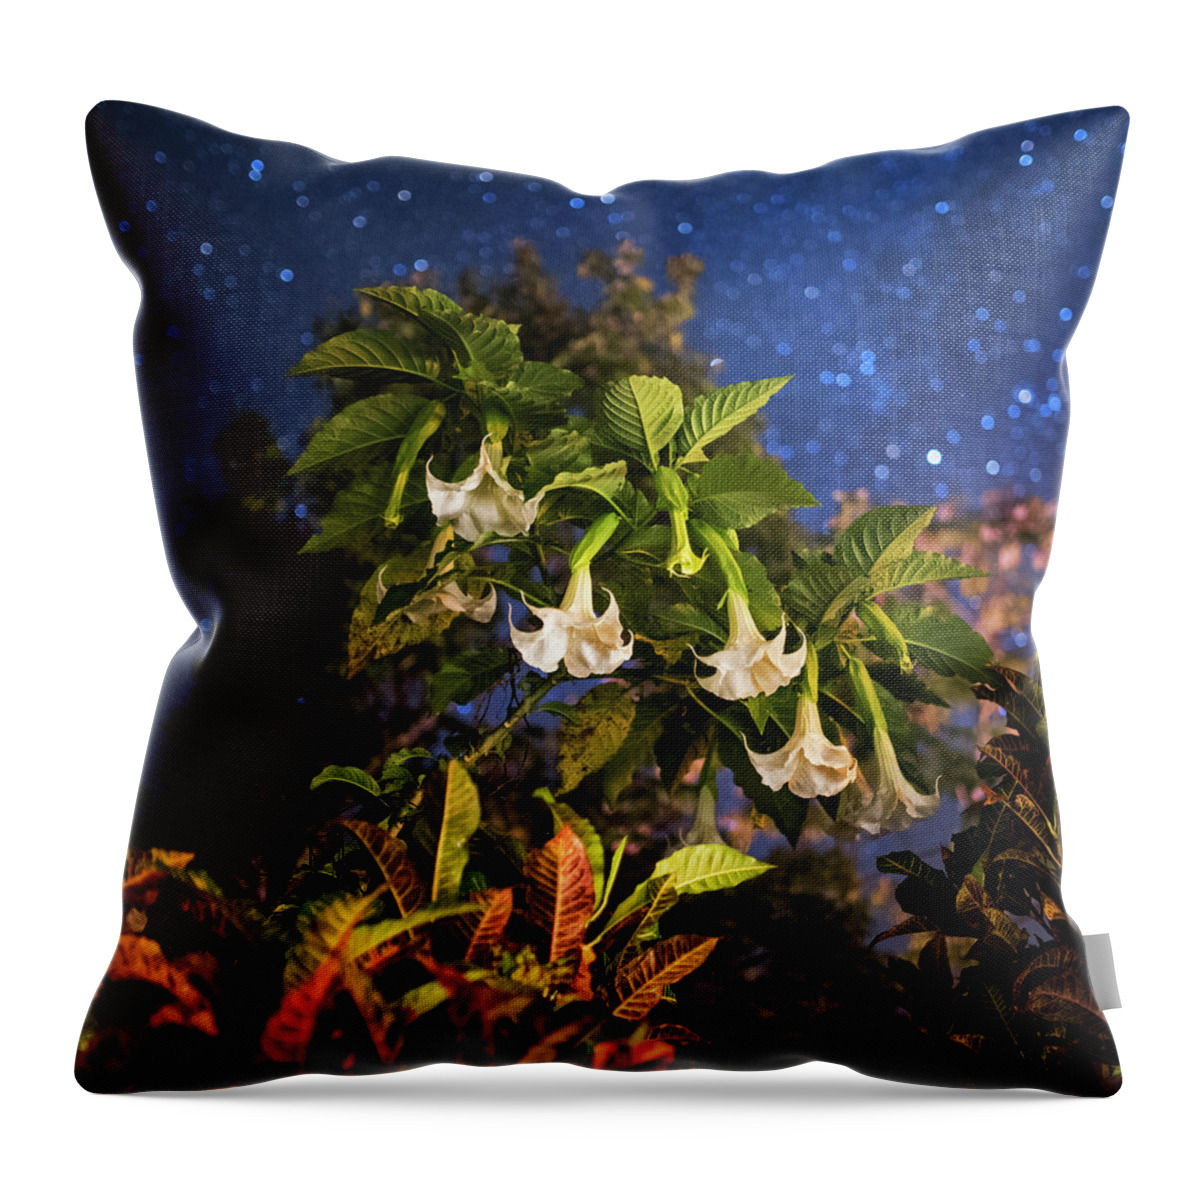 Belize Throw Pillow featuring the photograph Angel's Trumpet Flowers Belmopan Belize Starry Skies Square by Toby McGuire